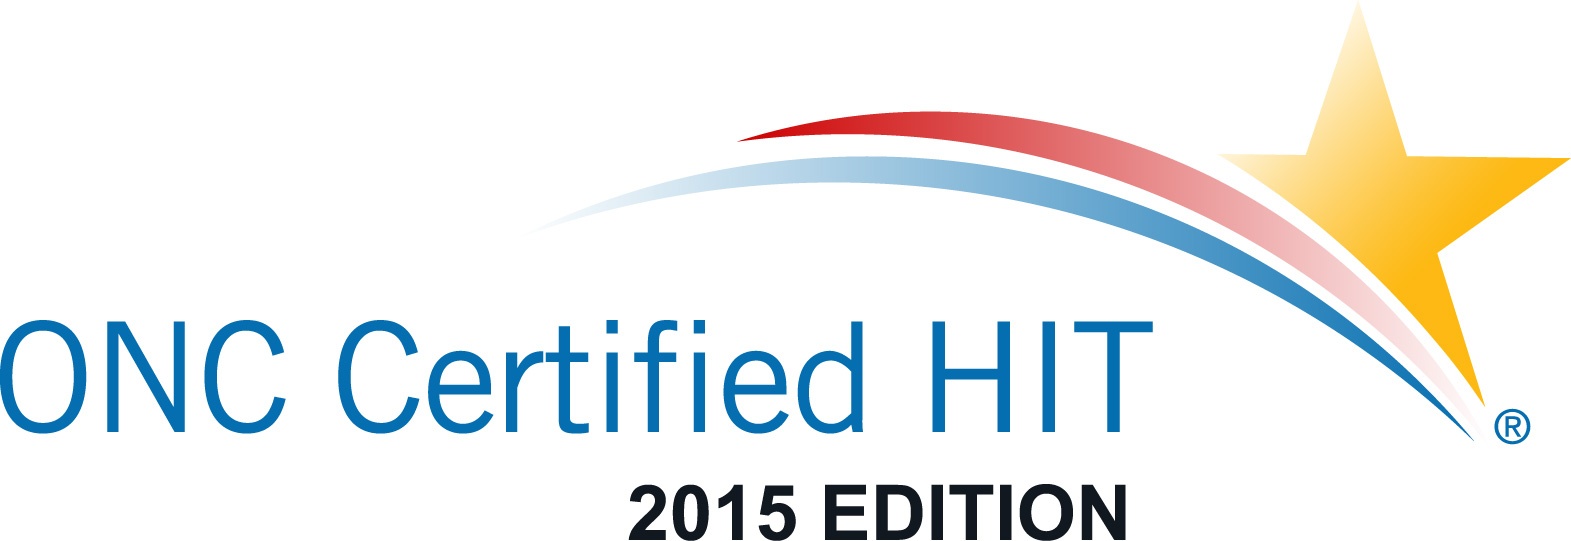 ONC_Certification_HIT_2015Edition_Stacked_RGB.jpg